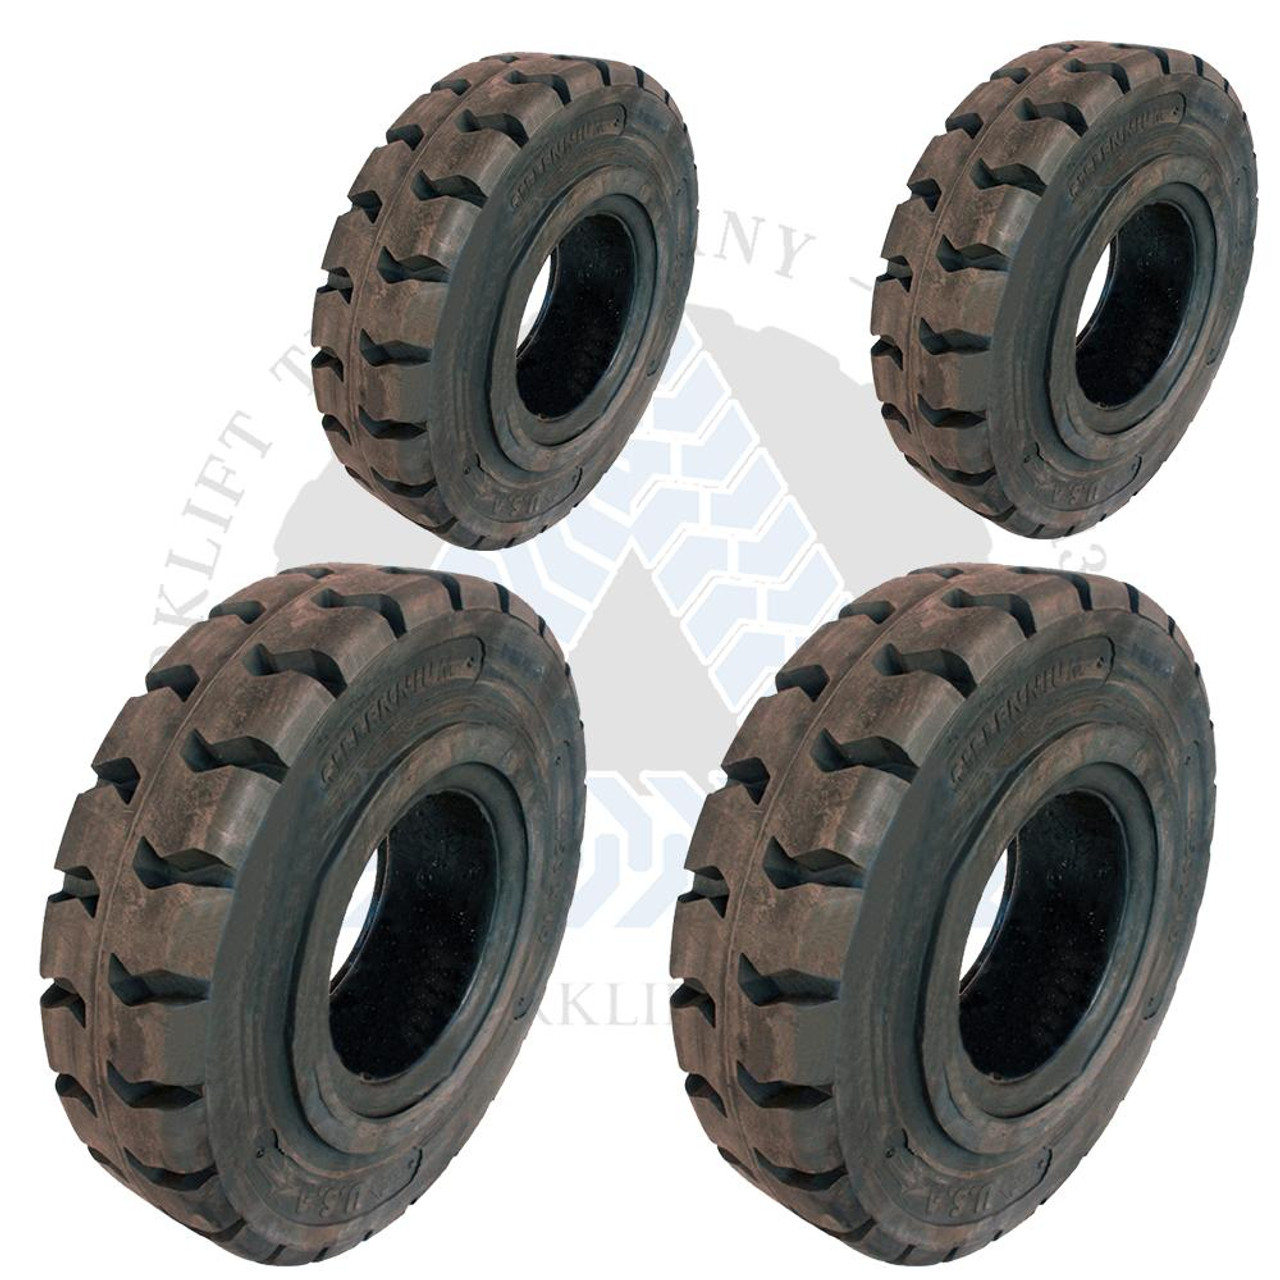 18x6x12-1/8 and 14x4-1/2x8 Black Rubber Forklift Cushion Solid Tires | 4X  DEAL